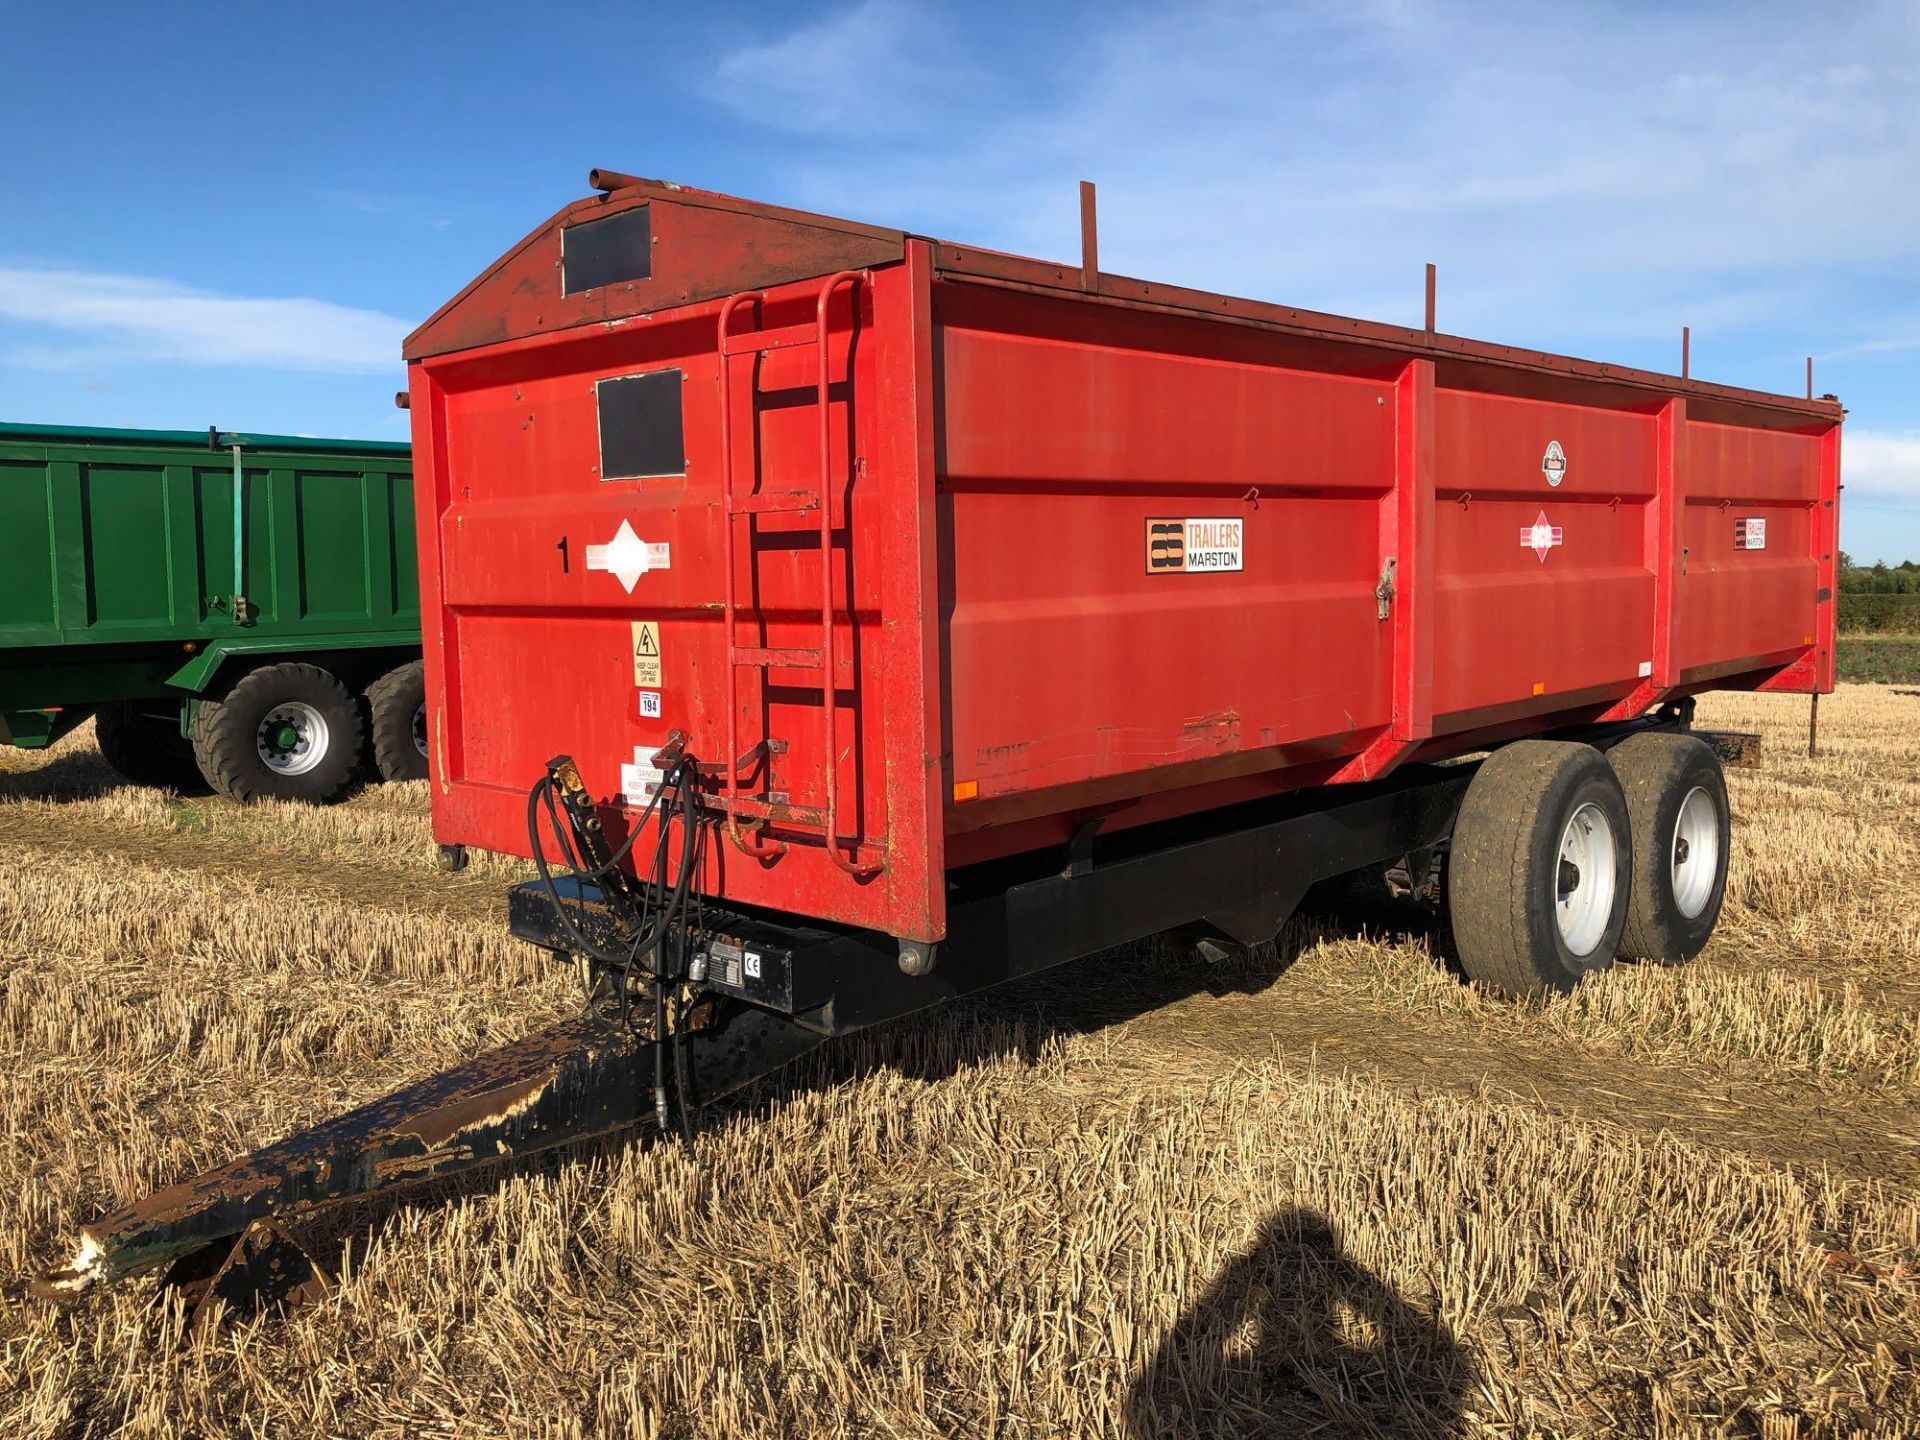 1995 AS Marston ACE FF14T twin axle grain trailer with sprung drawbar, manual tailgate and grain chu - Image 7 of 7